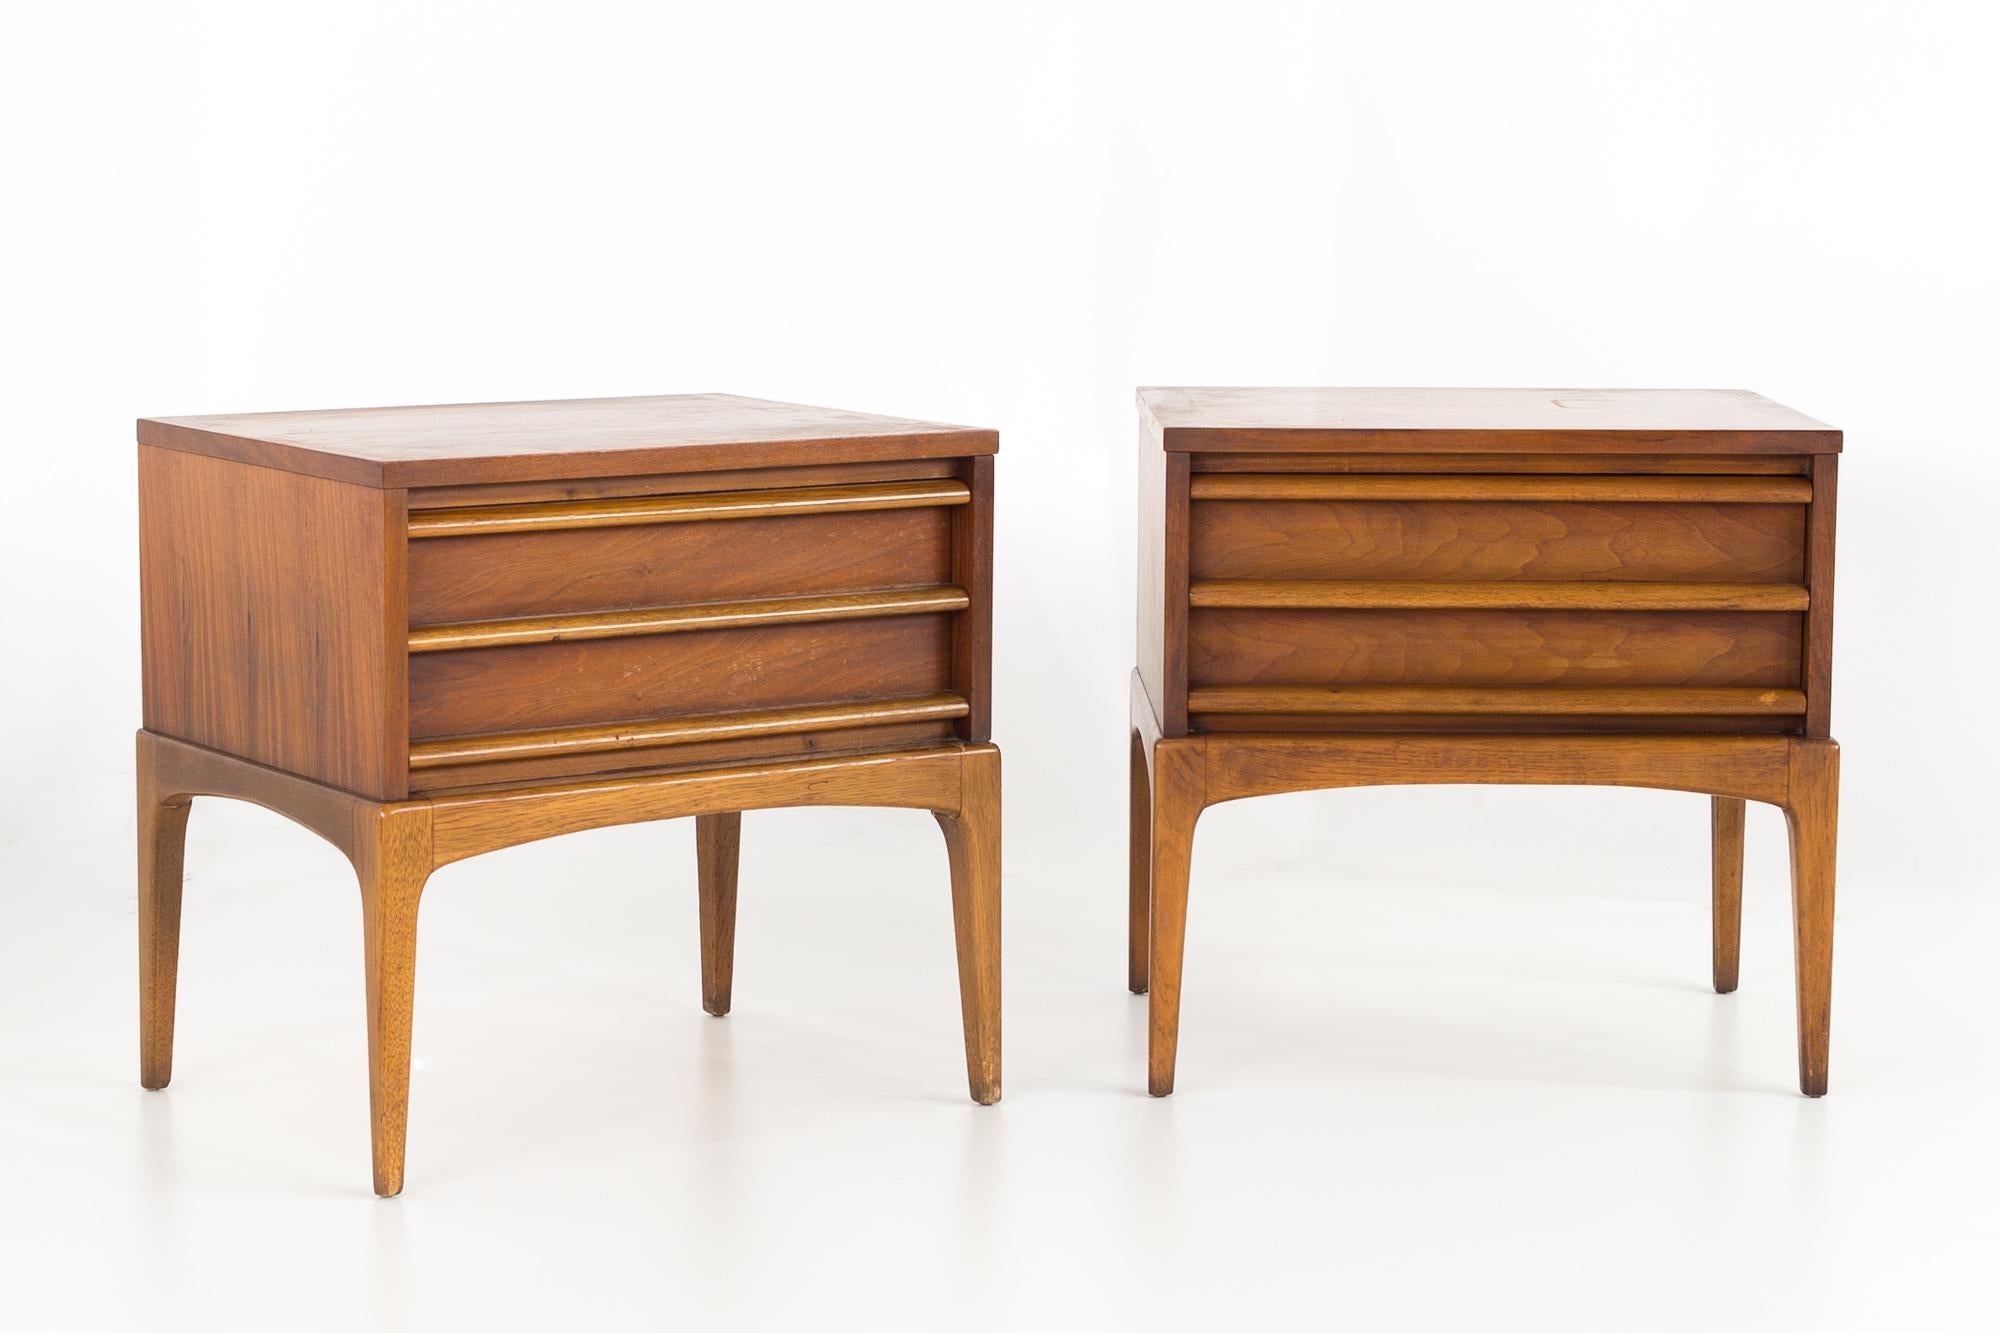 Paul McCobb style Lane Rhythm mid century 2 drawer nightstands - pair

Each nightstand measures 22.5 wide x 17.5 deep x 22.25 inches high

All pieces of furniture can be had in what we call restored vintage condition. That means the piece is